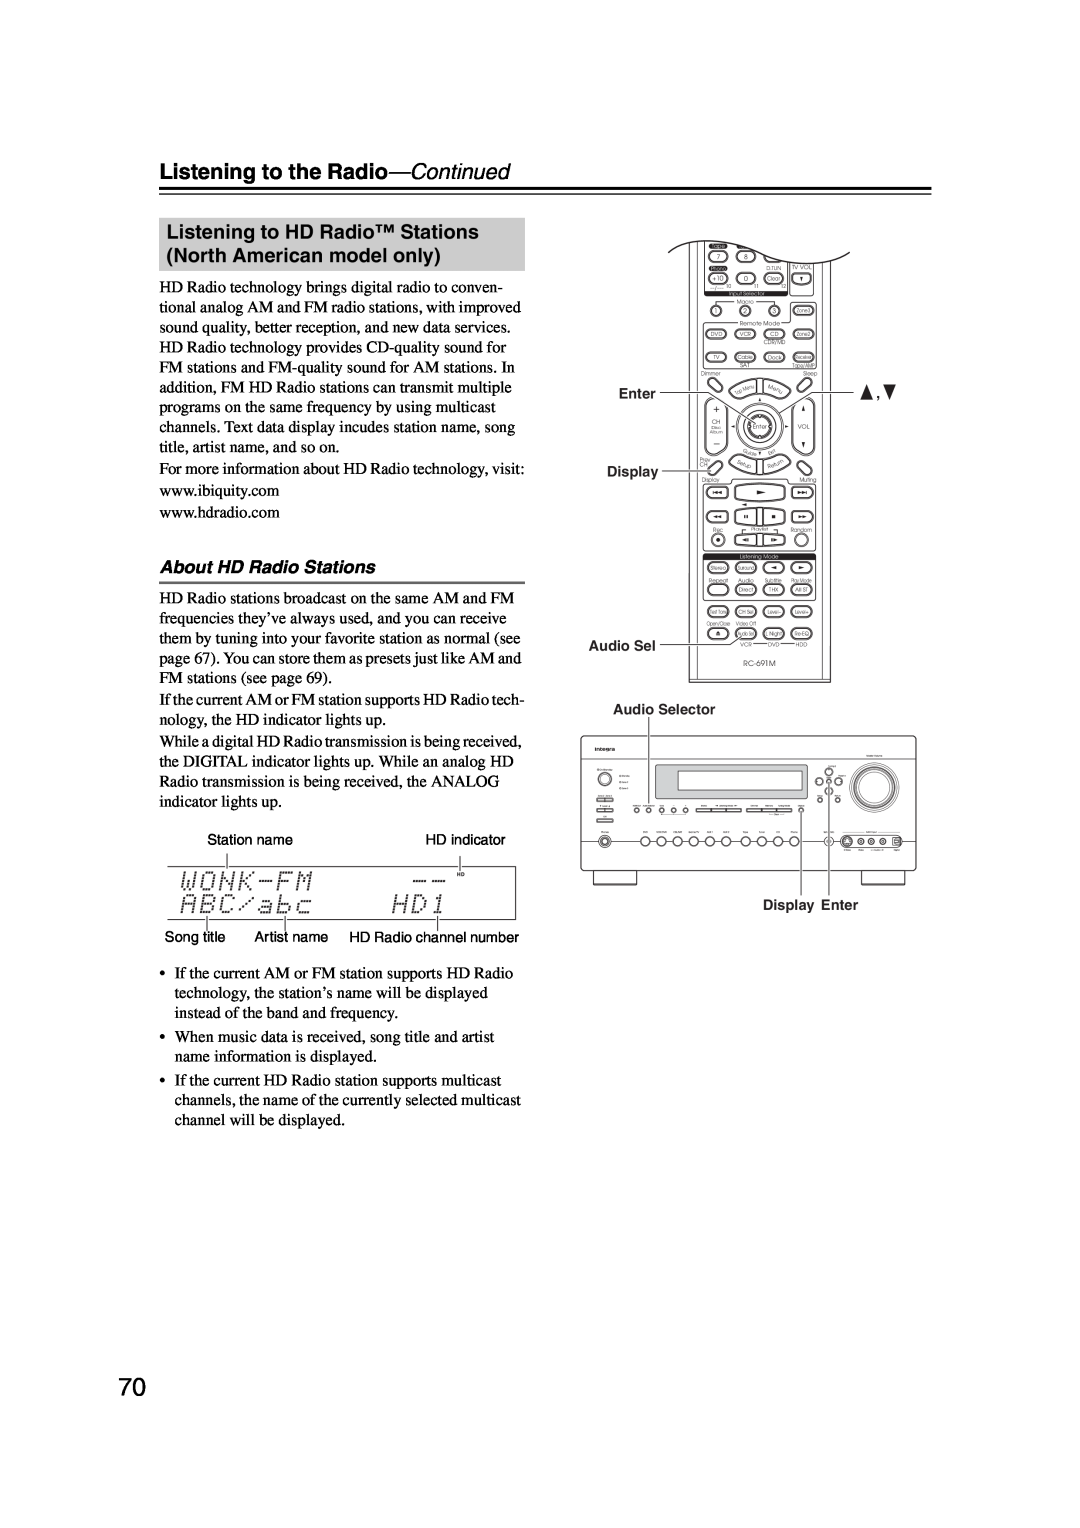 Integra DHC-9.9 instruction manual About HD Radio Stations, Listening to the Radio—Continued 